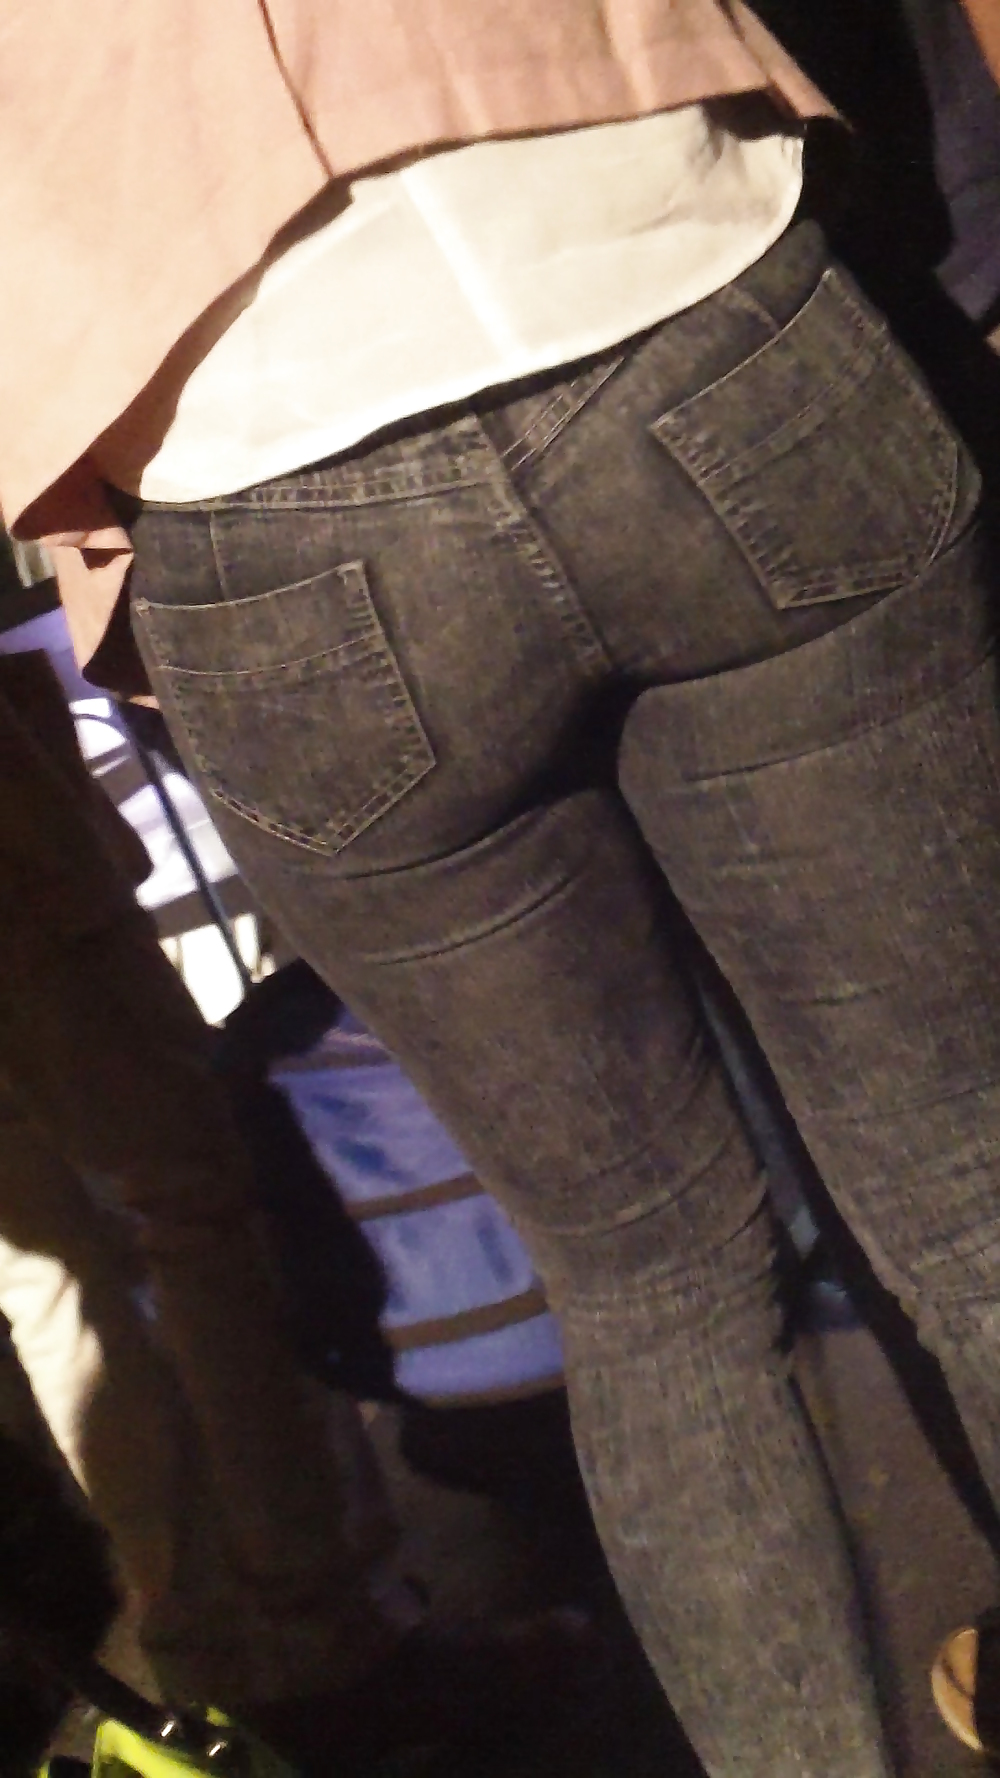 Tight teen butts & ass in jeans up close  #20661002